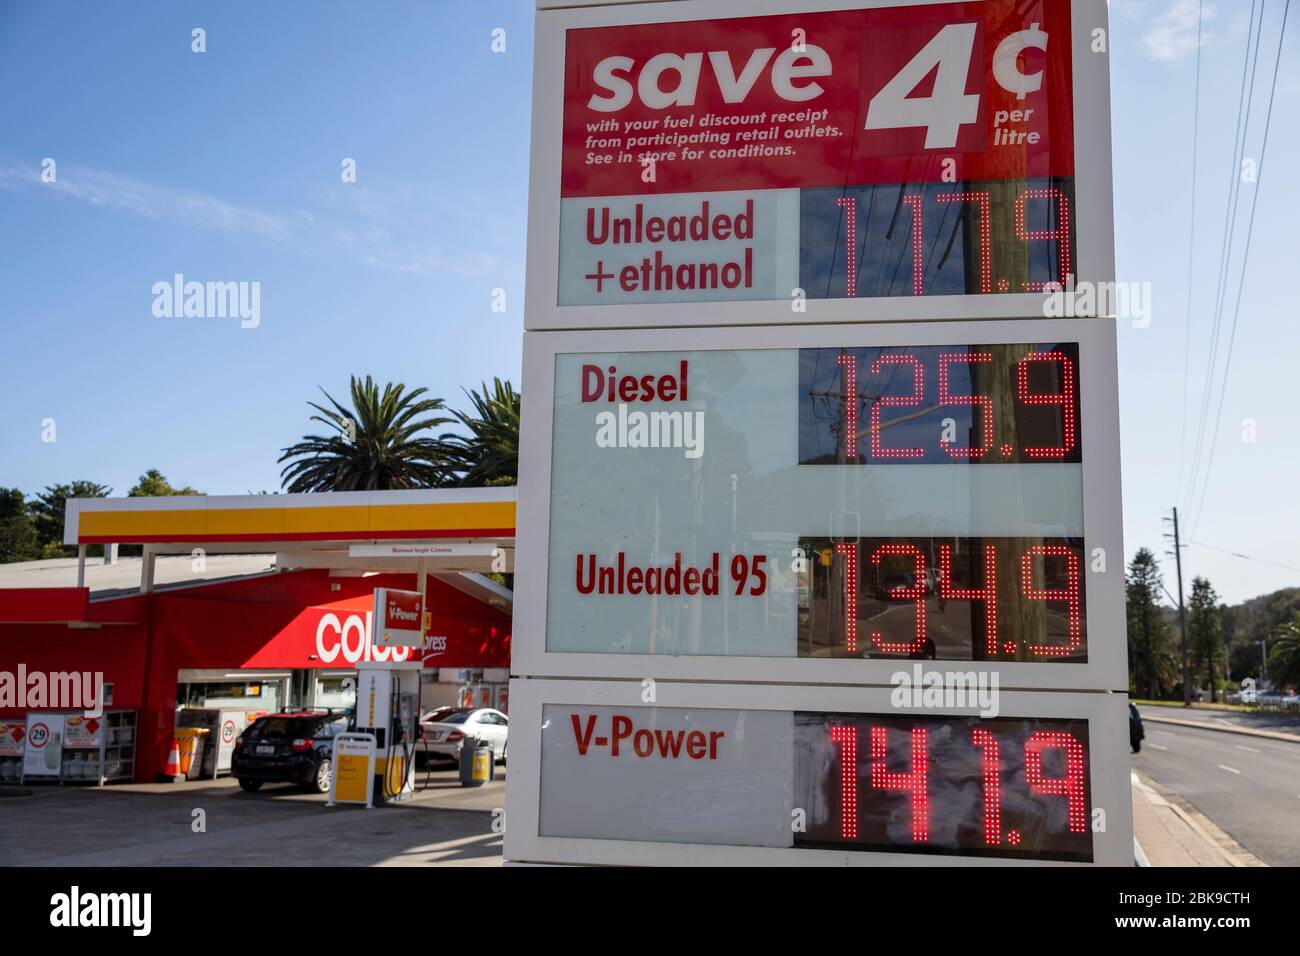 Australia coronavirus pandemic has seen a drop in fuel prices across the country as demand lowers, May 2020 fuel prices in Sydney,Australia Stock Photo